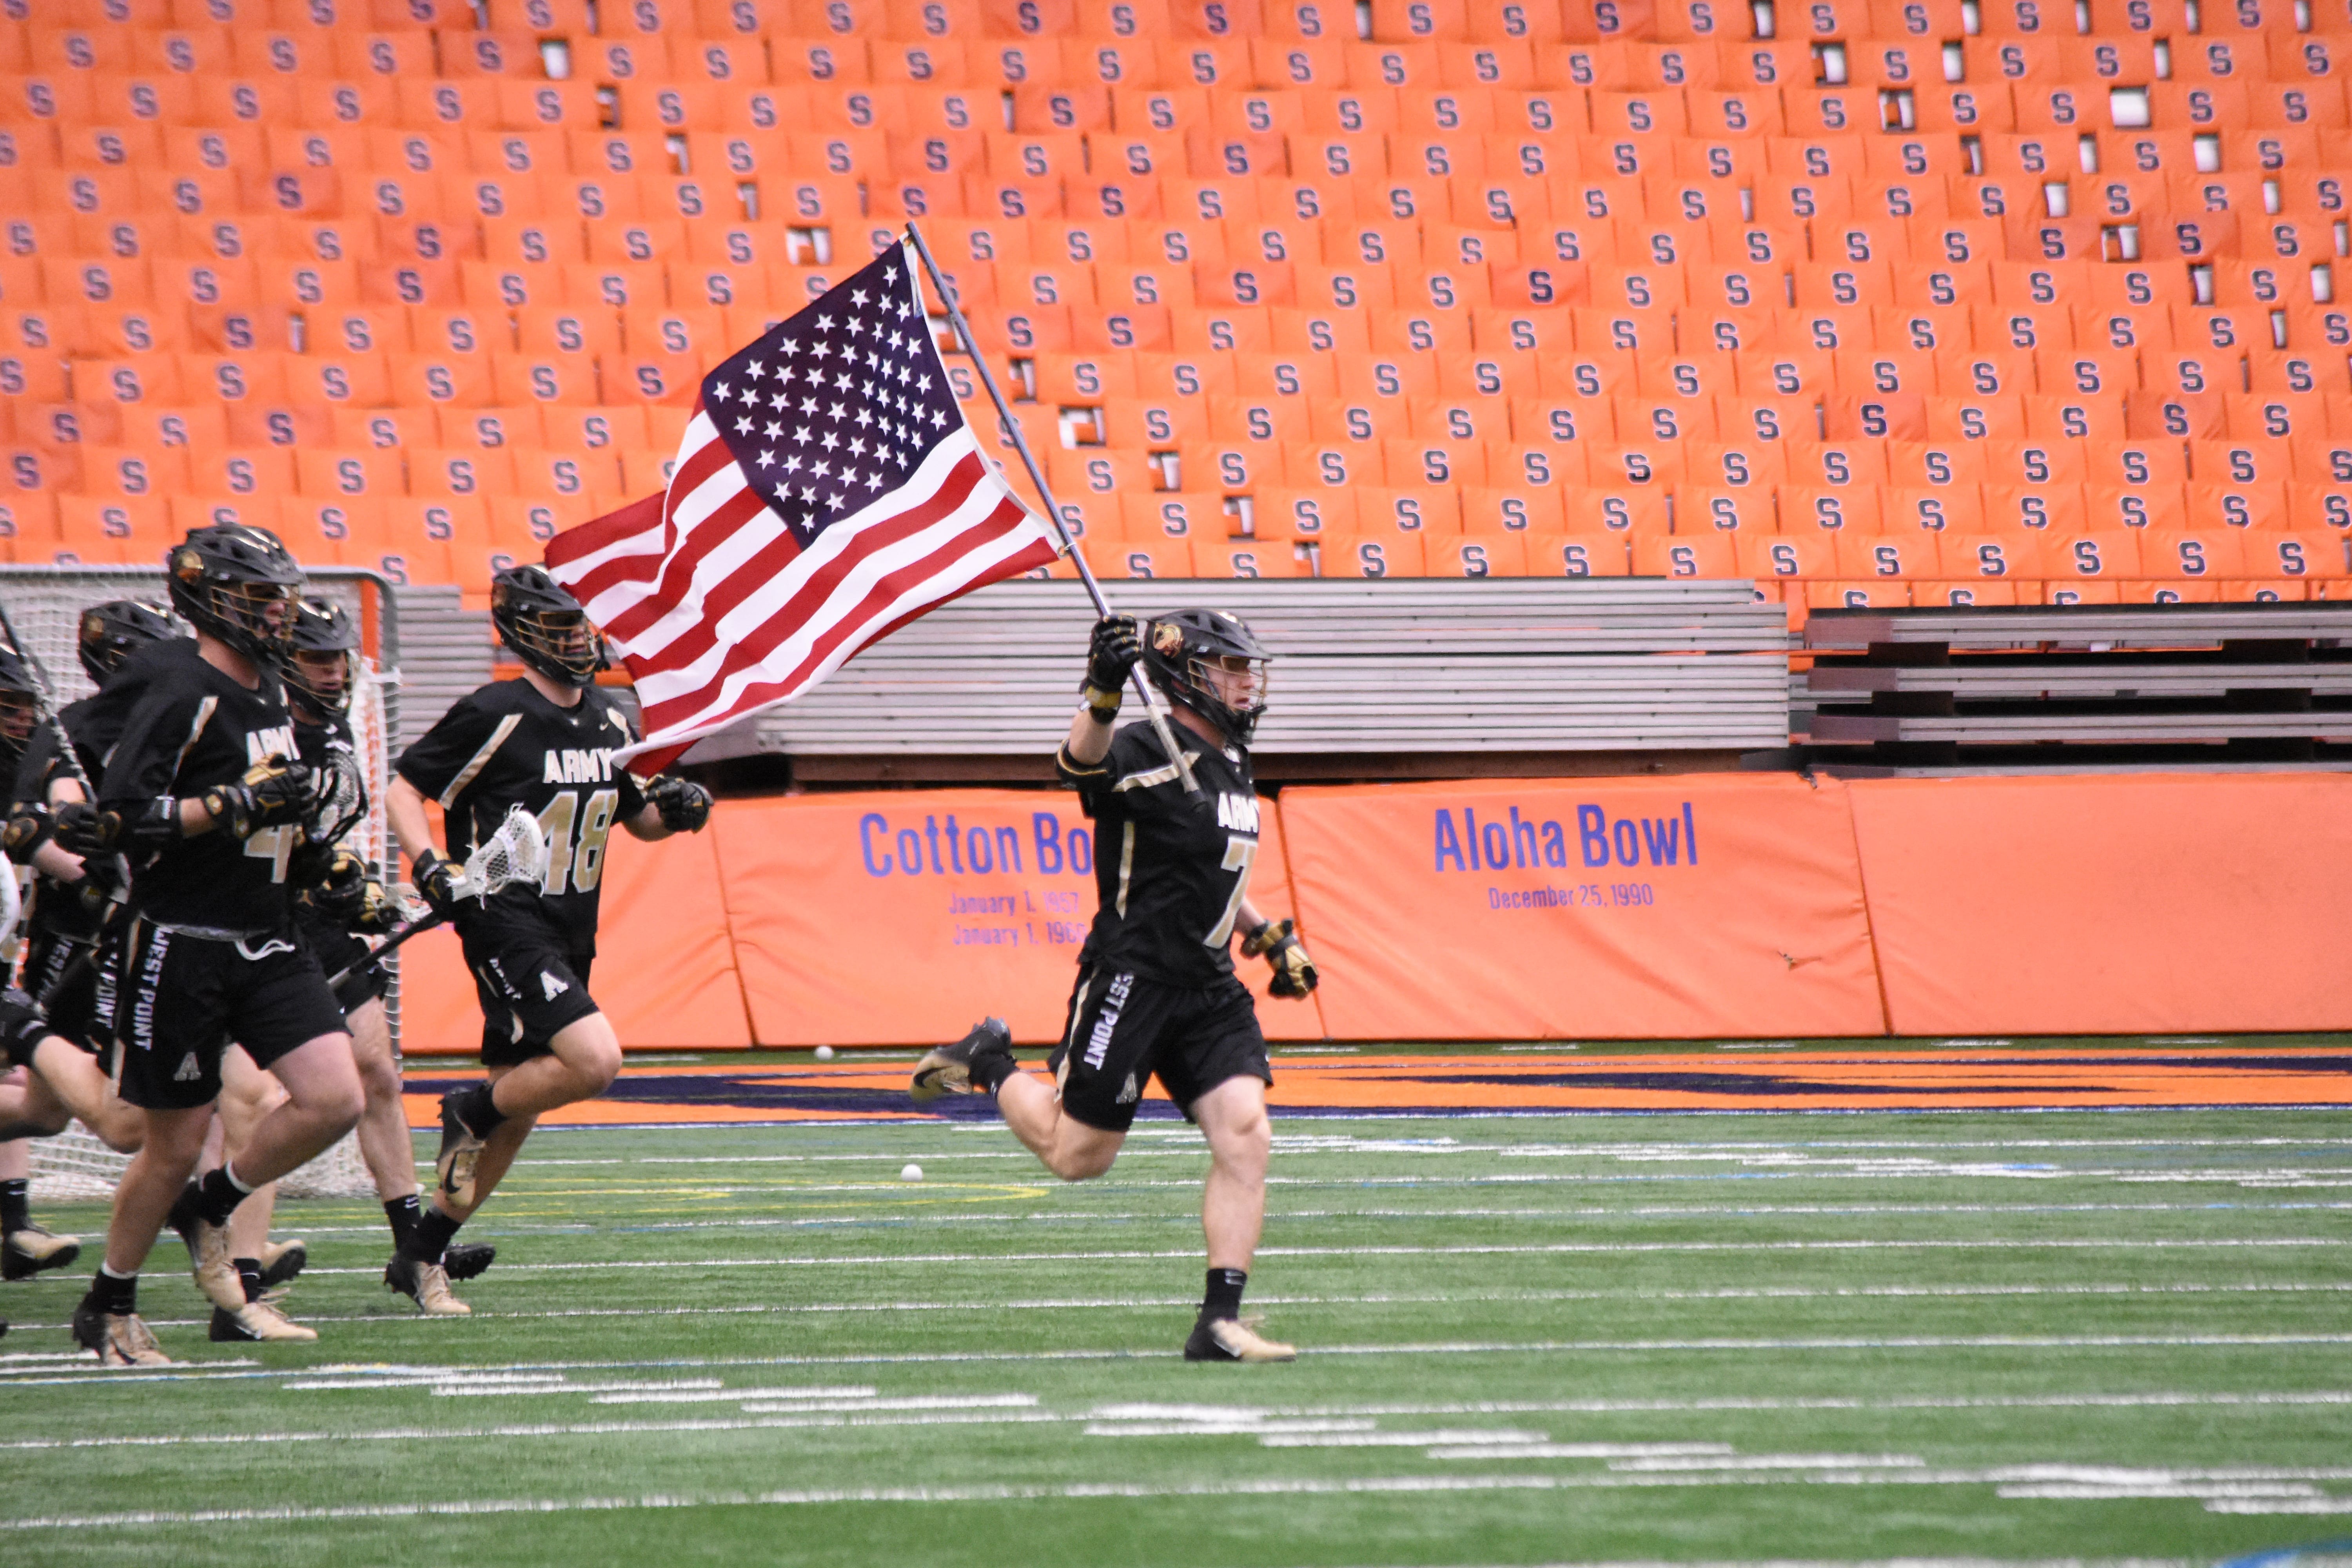 syracuse orange army black knights ncaa men's division i college lacrosse 2020 photo gallery